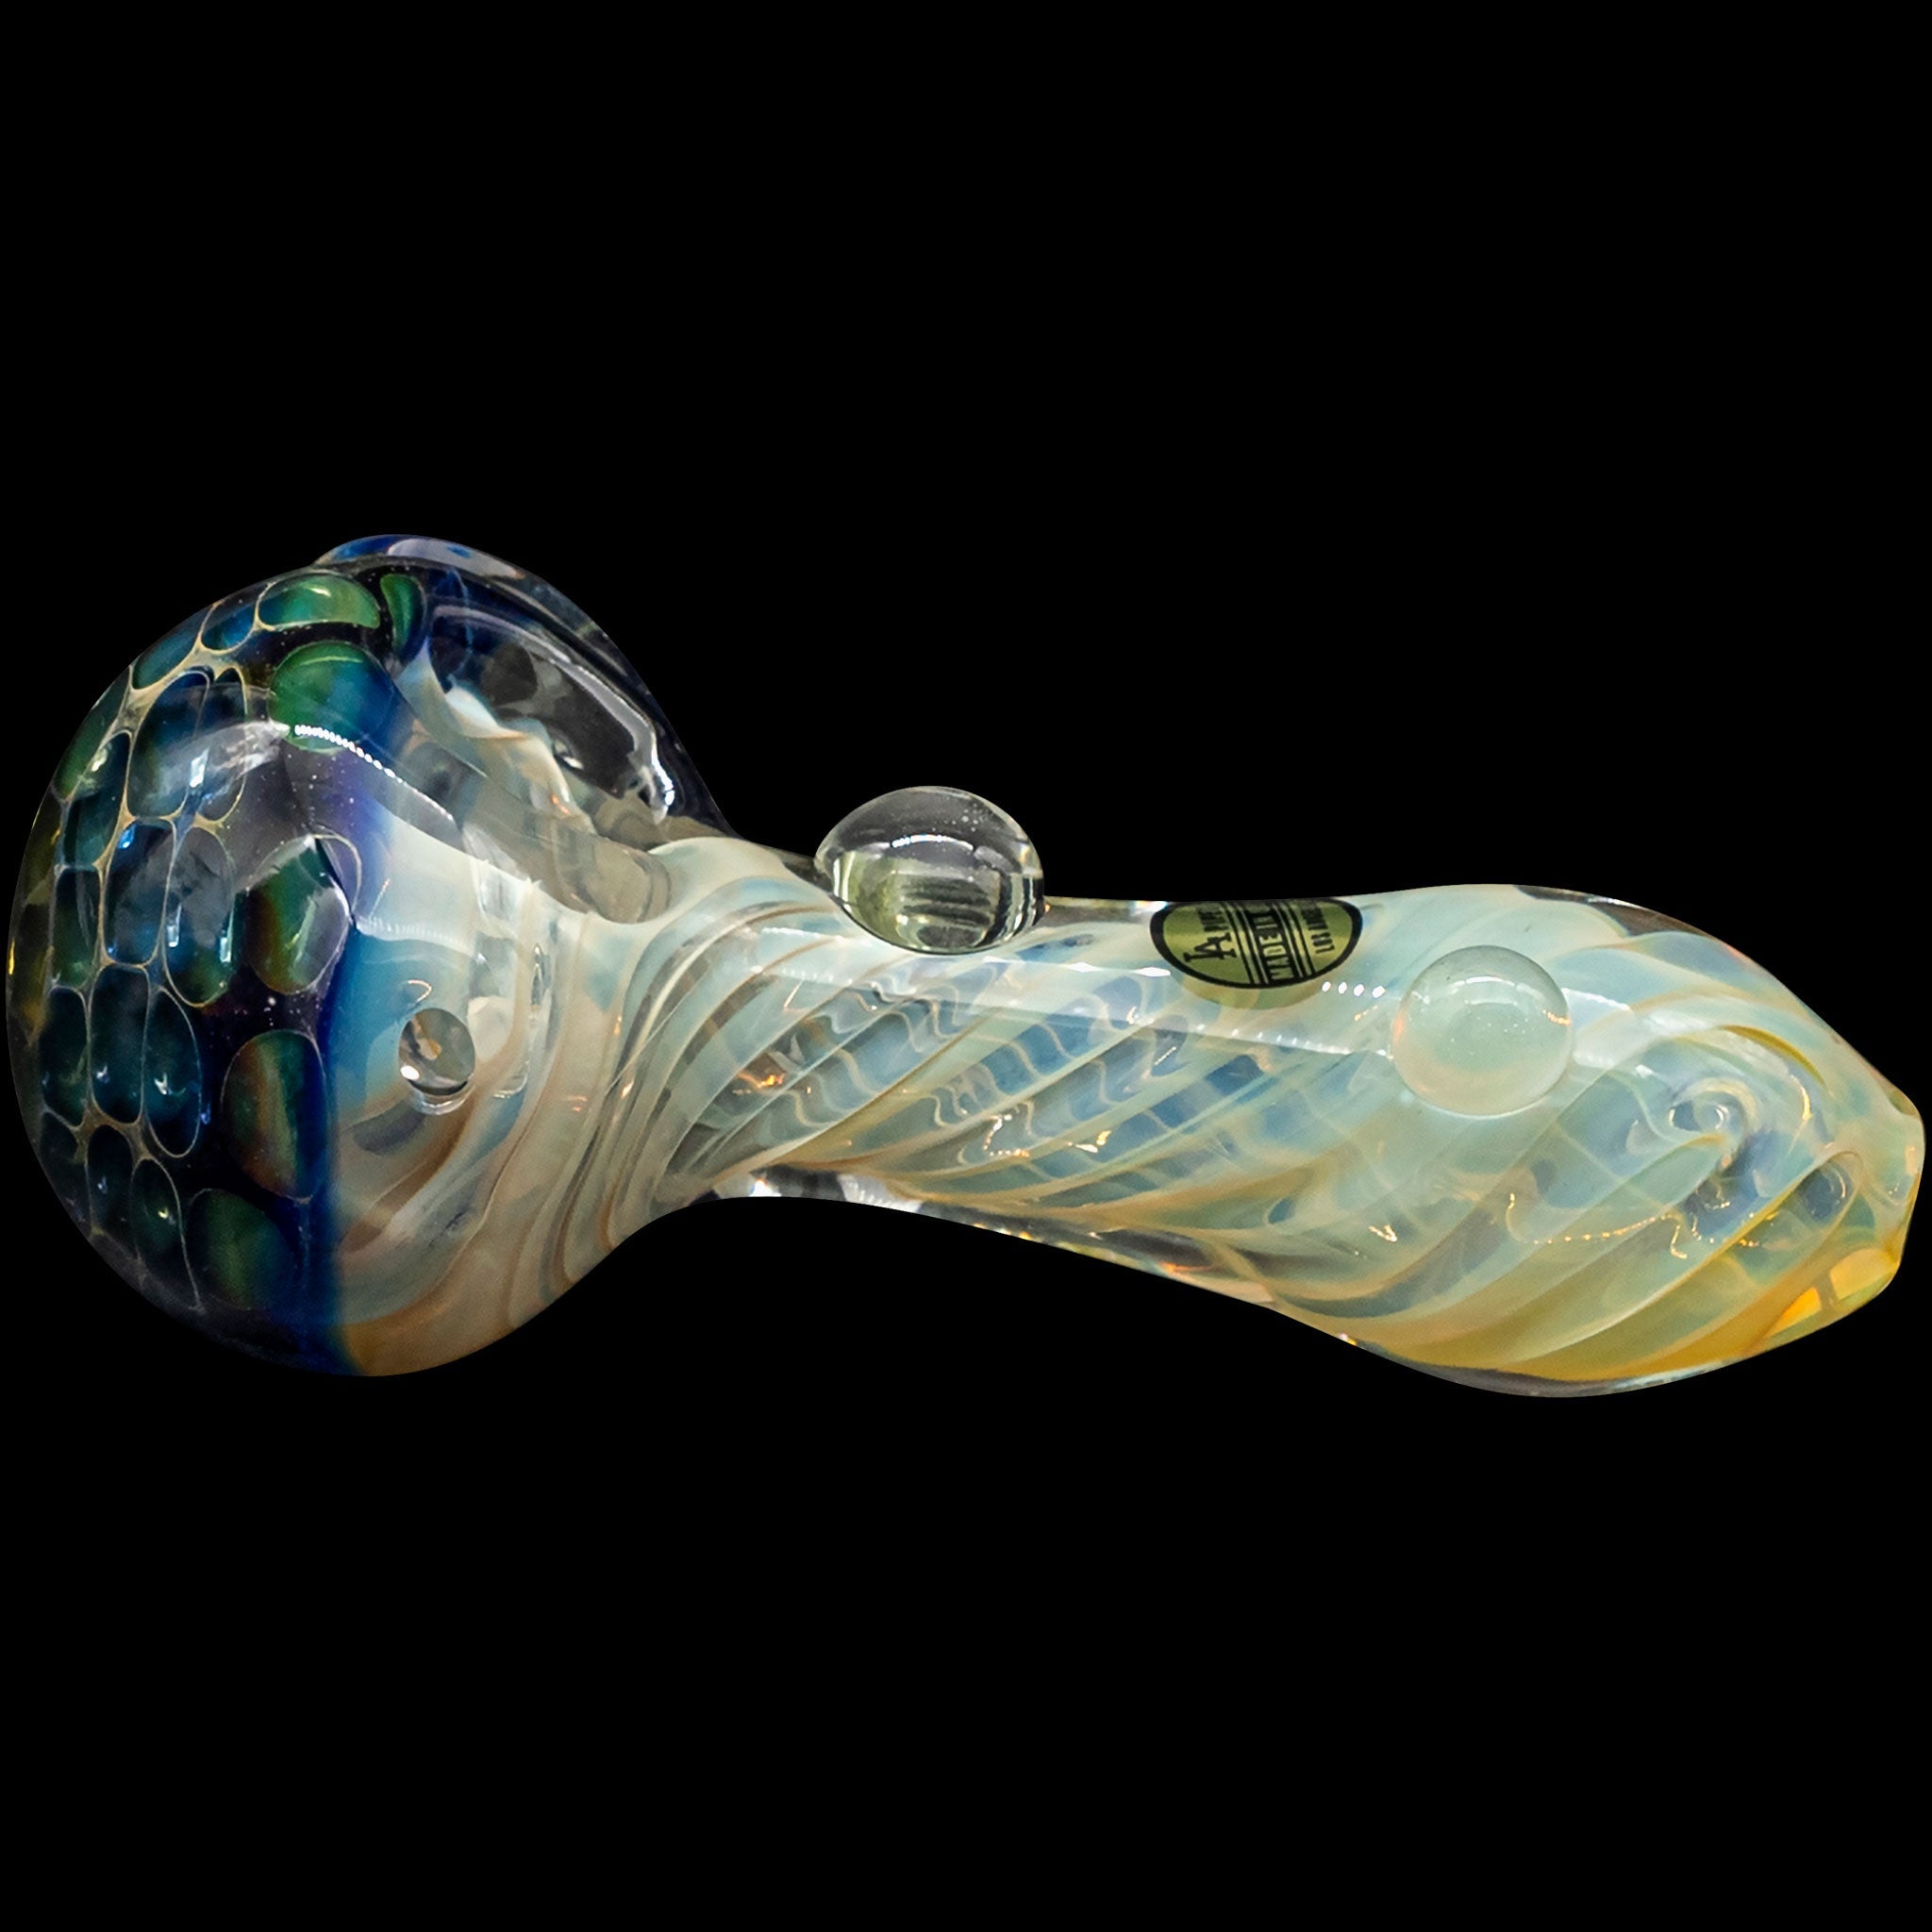 LA Pipes "The Hive" Honeycomb Color Changing Glass Pipe